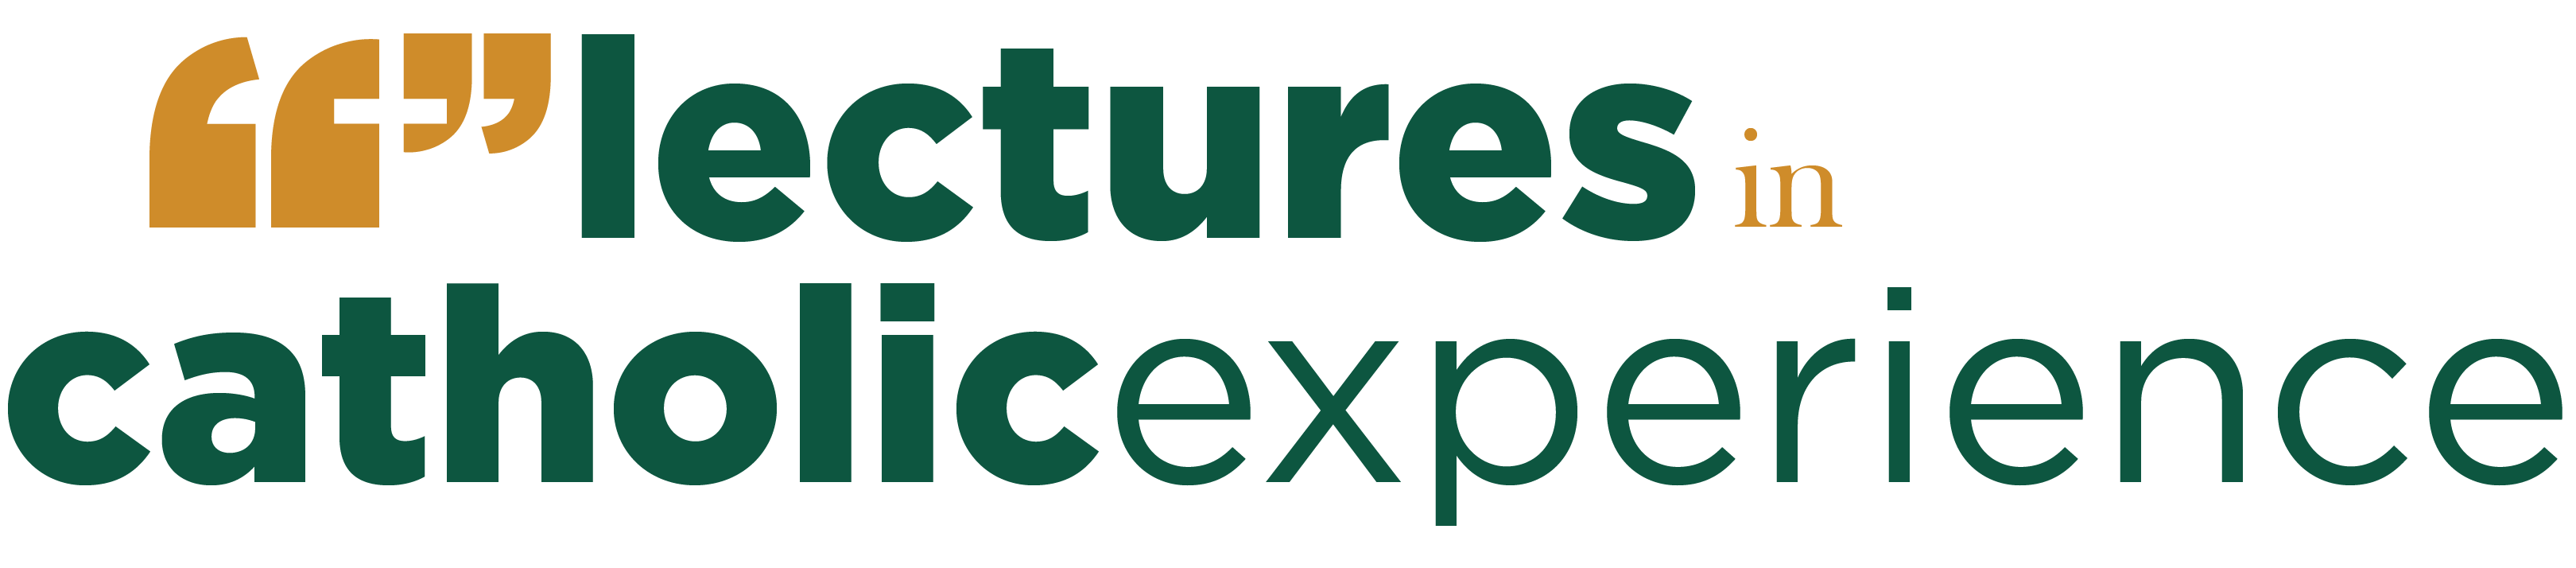 Lectures in Catholic Experience logo